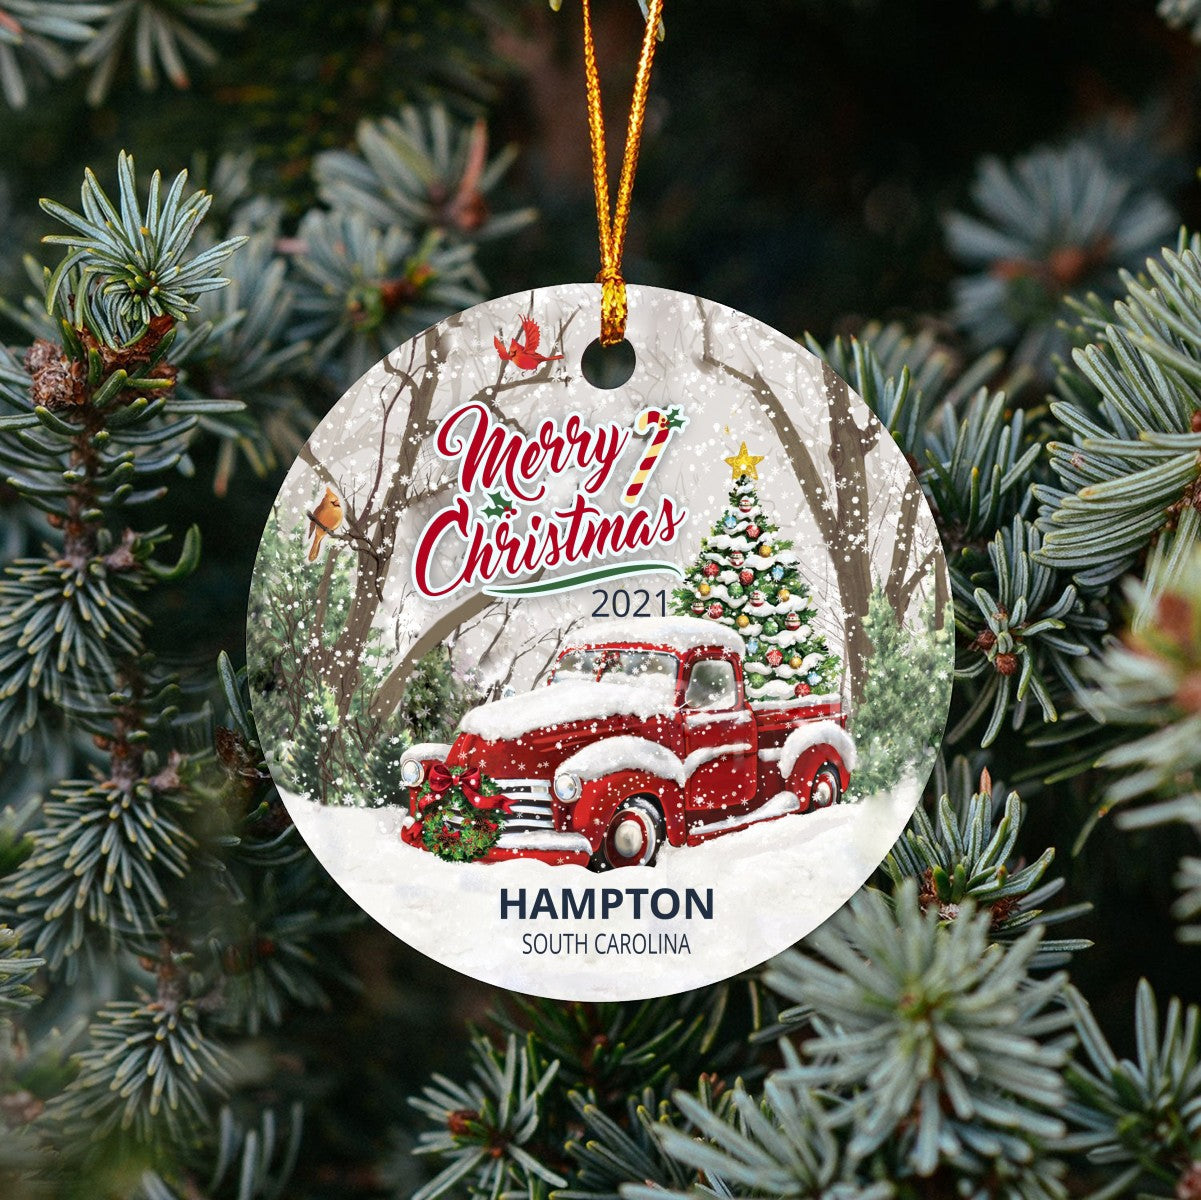 Christmas Tree Ornaments Hampton - Ornament With Name City, State Hampton South Carolina SC Ornament - Red Truck Xmas Ornaments 3'' Plastic Gift For Family, Friend And Housewarming